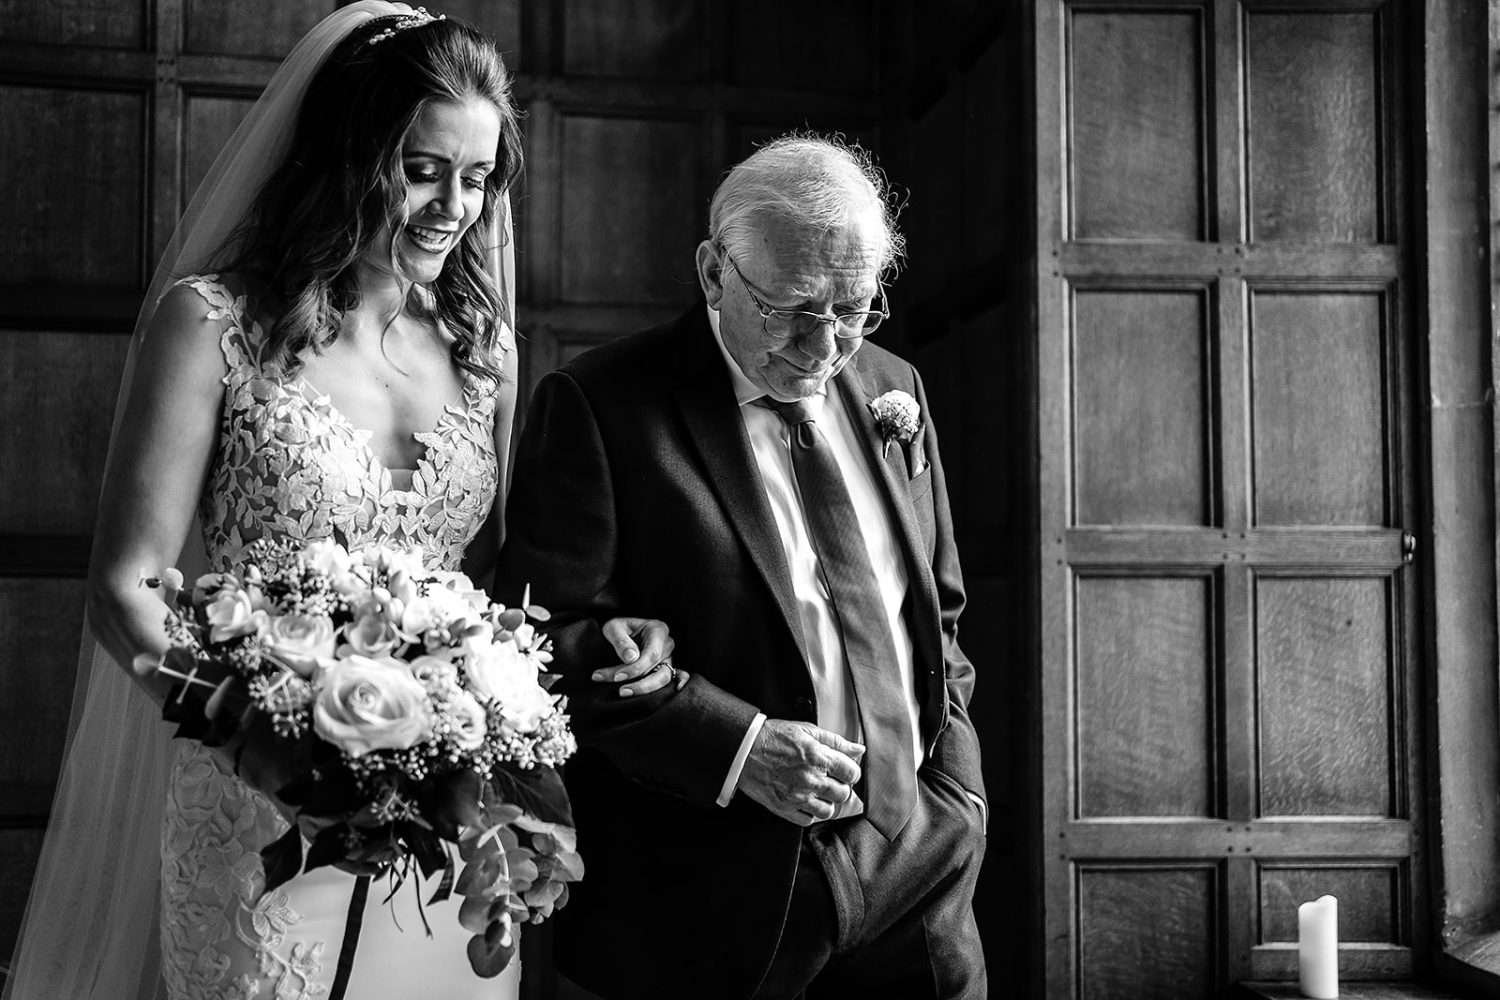 A Father escorts his Daughter at her Hengrave Hall wedding day on the way to the ceremony. This Black and White photo shows the elederly Father supporting his Daughter by taking her arm as they descend the stairs. The Bride is talking to her father and also holding her bouquet. 